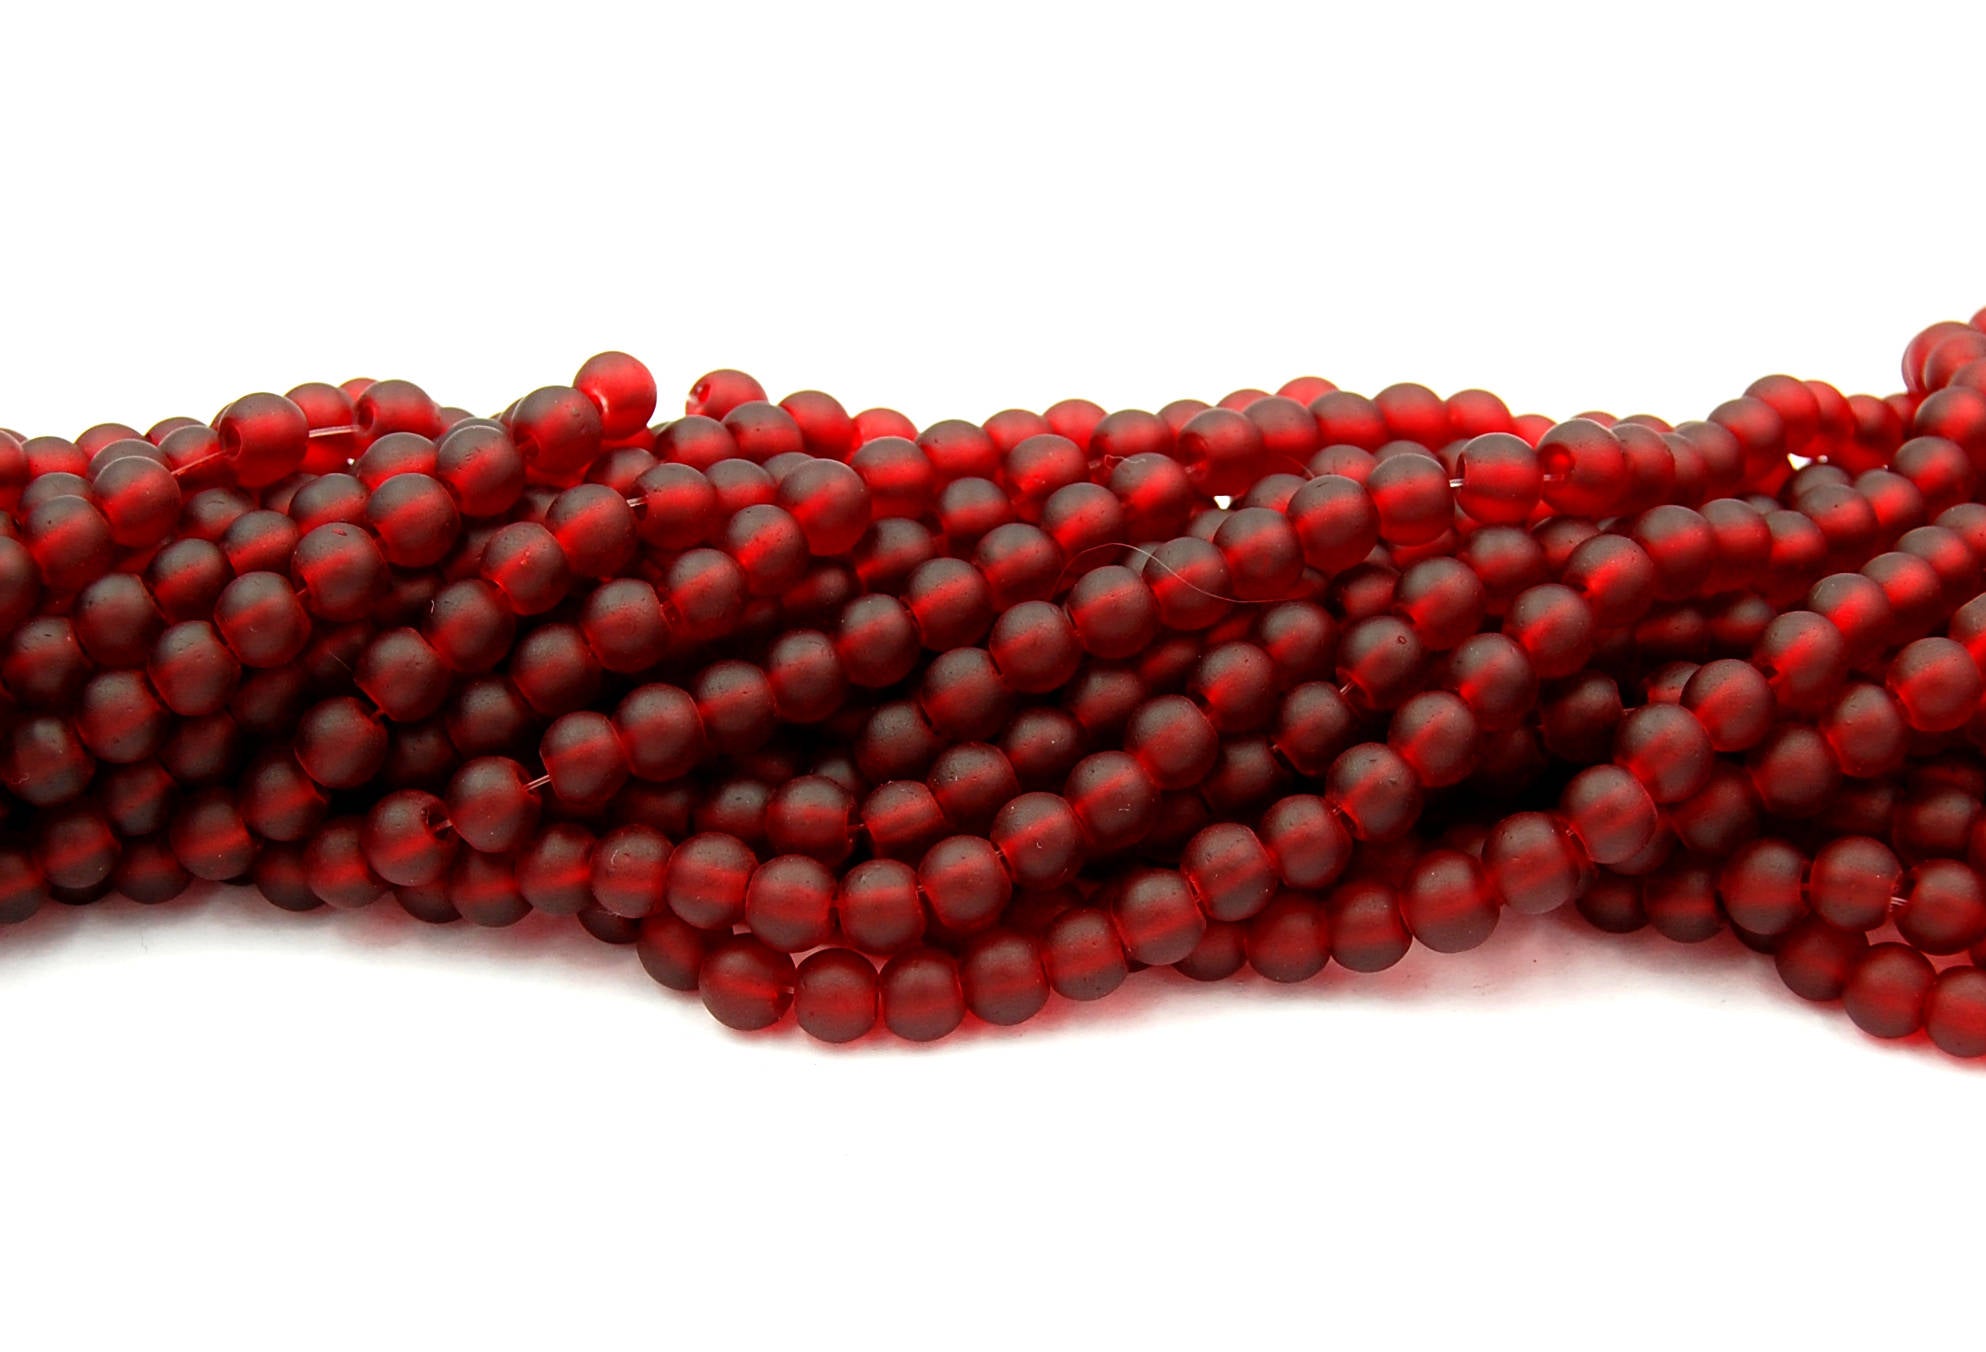 Garnet Red 6mm Frosted Matte Glass Round Druk Beads - 100pc